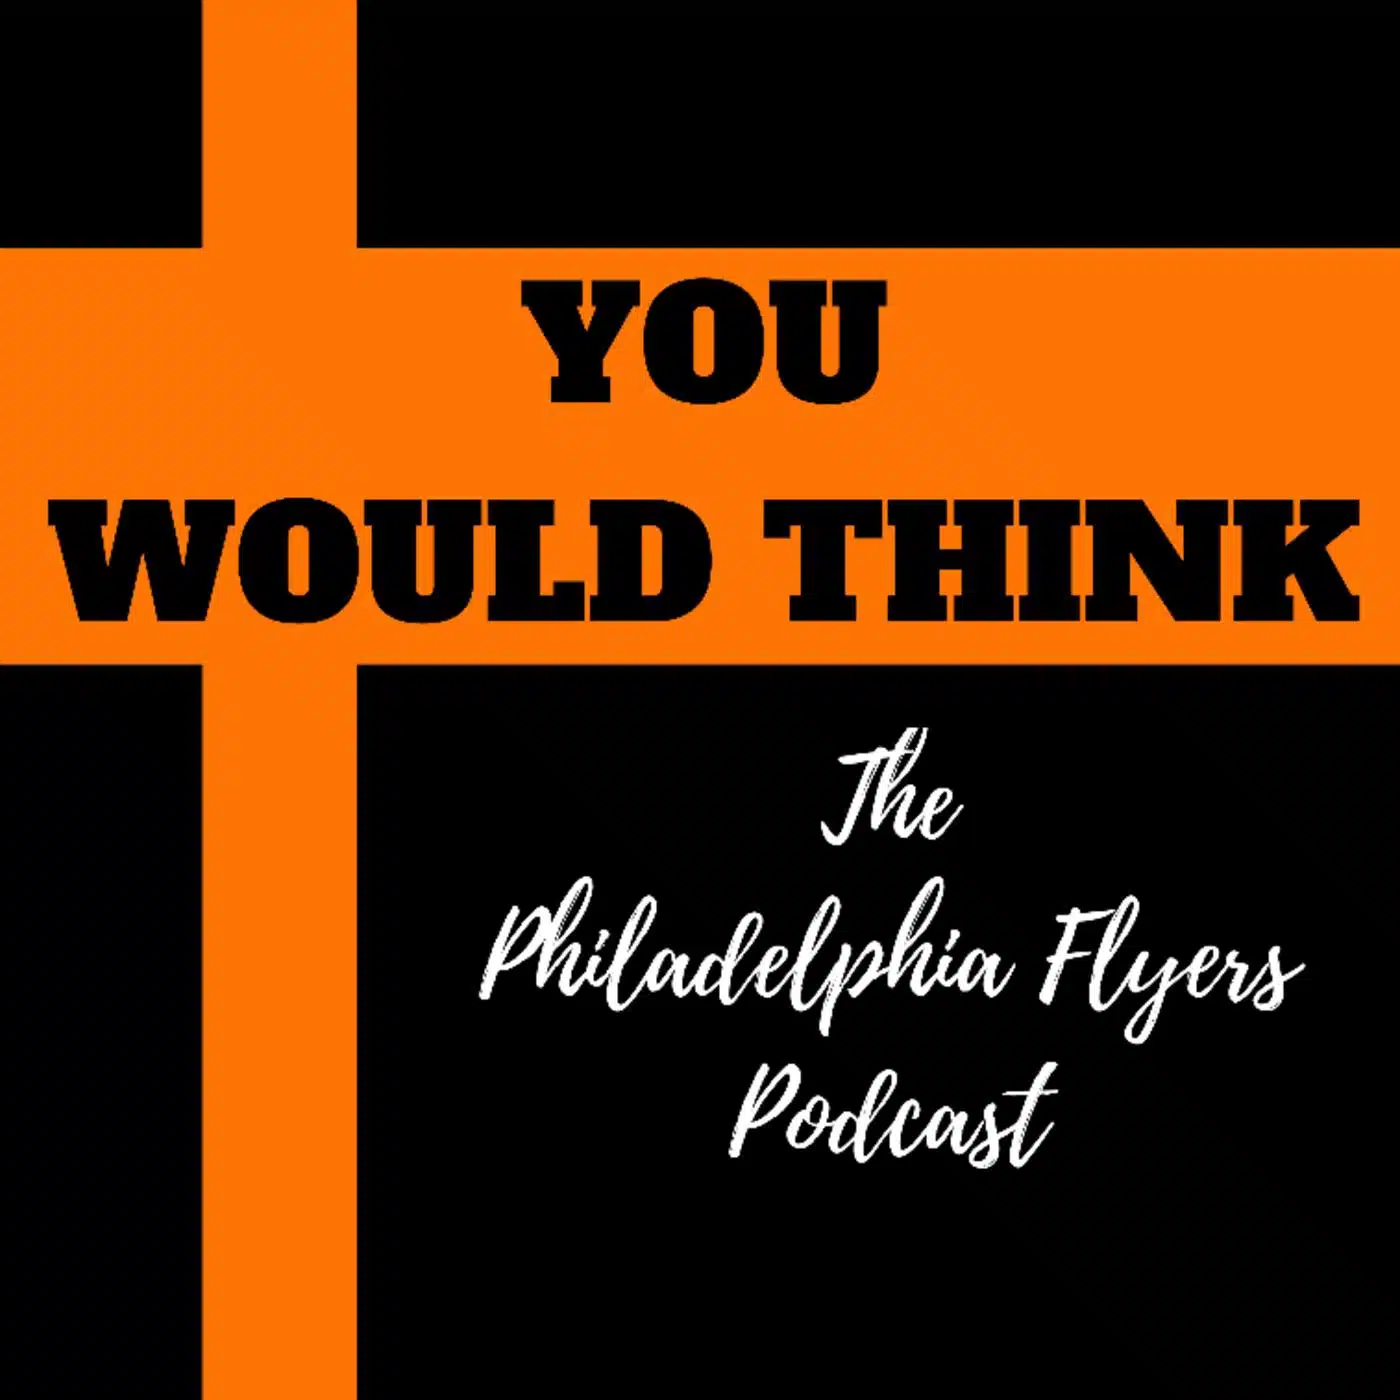 YWT: The Philadelphia Flyers Podcast – YWT #188 – Emptying The Tank